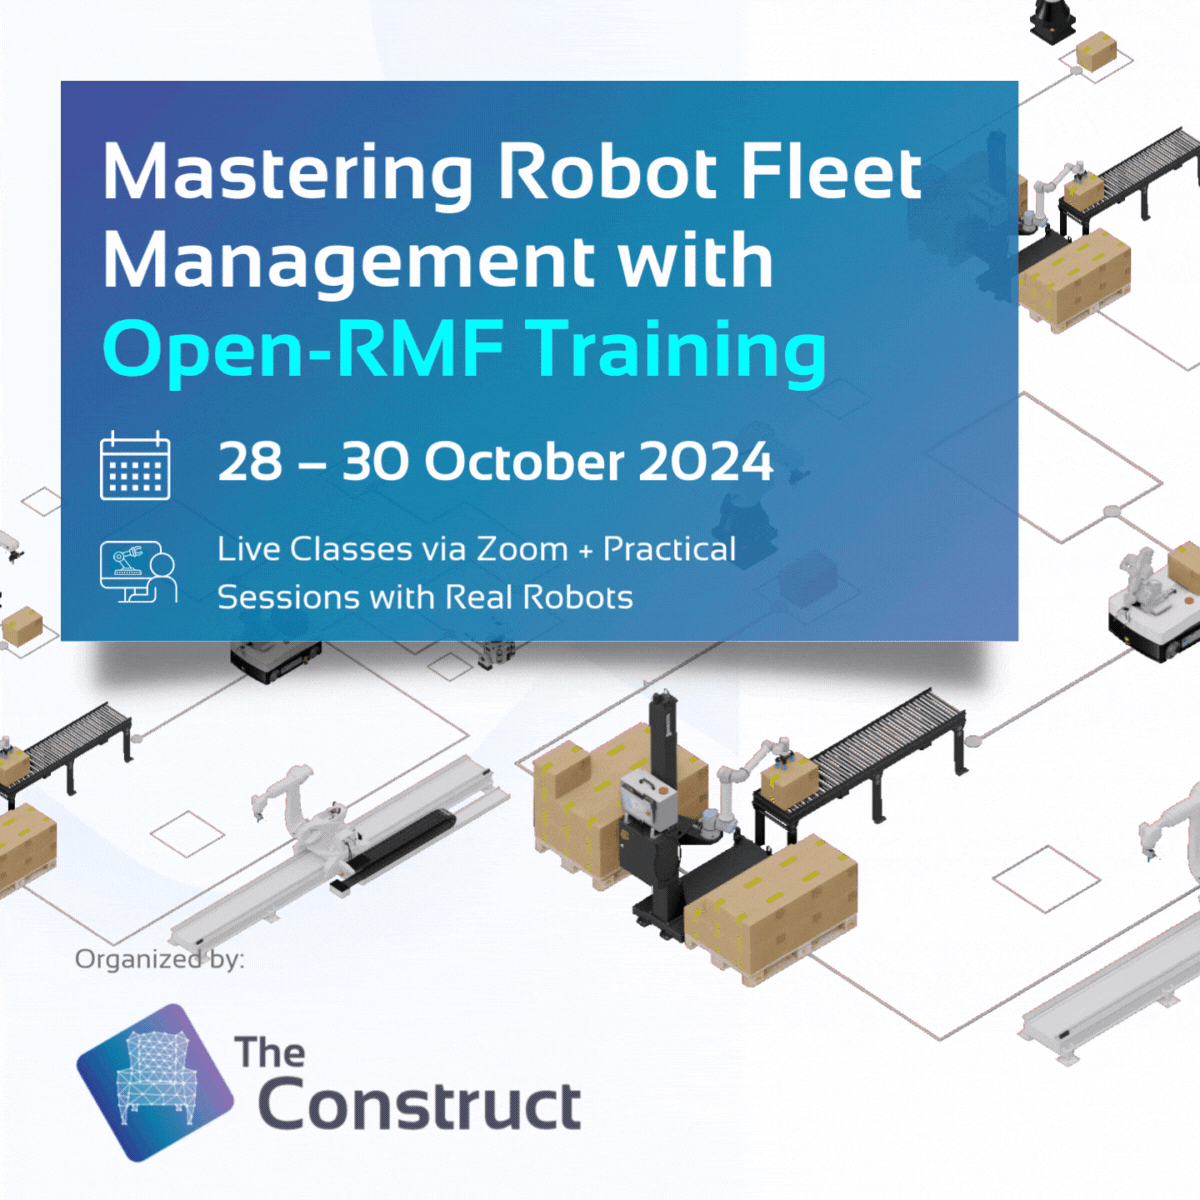 Mastering Robot Fleet Management with Open-RMF Training by The Construct